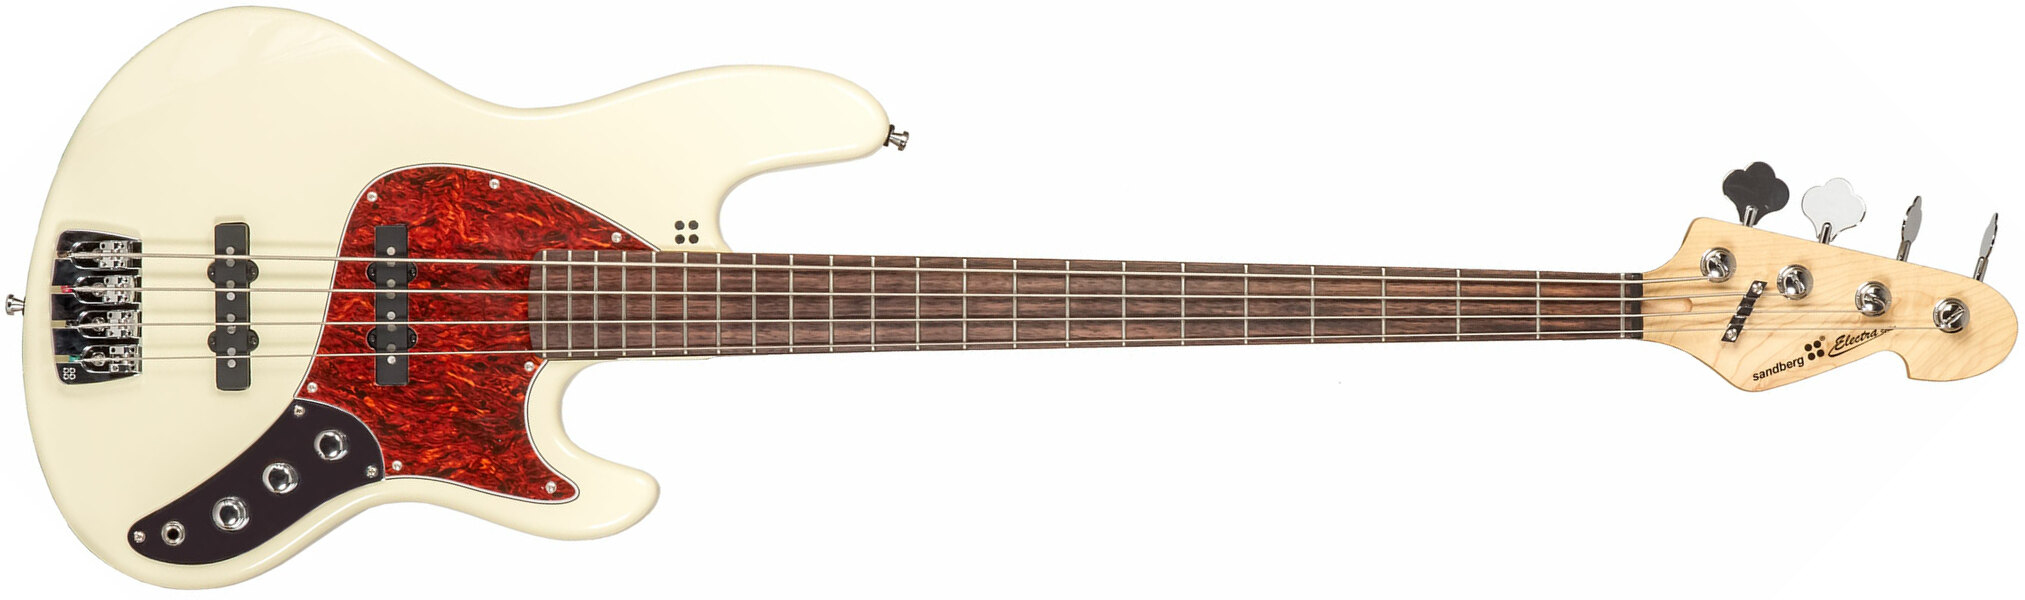 Sandberg Electra Bass Tt 4 Active Rw - Creme - Solid body electric bass - Main picture